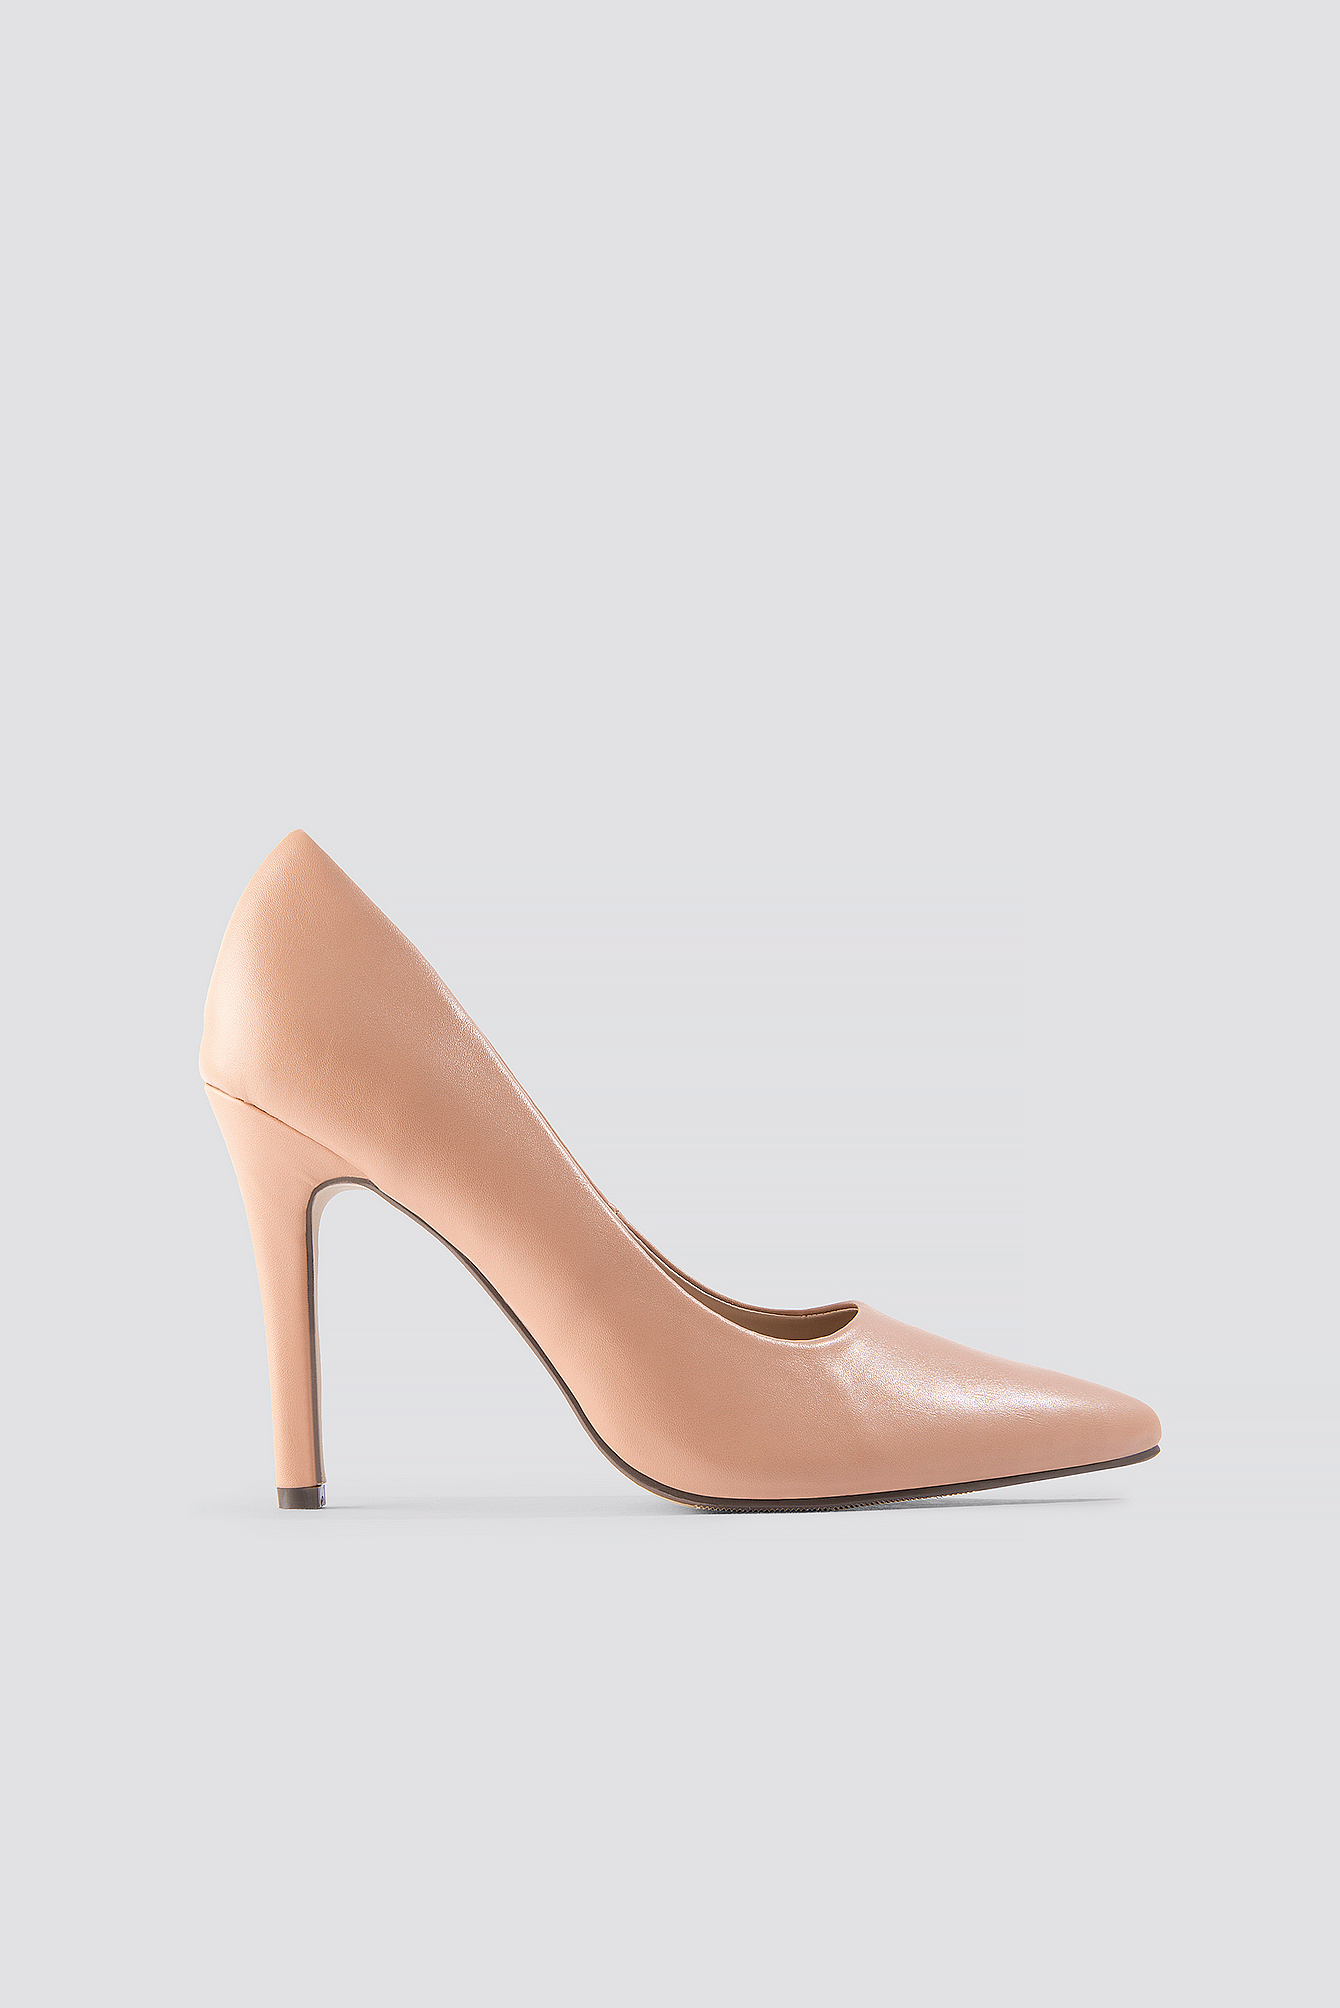 NA-KD Shoes Pumps - Pink,Beige,Nude